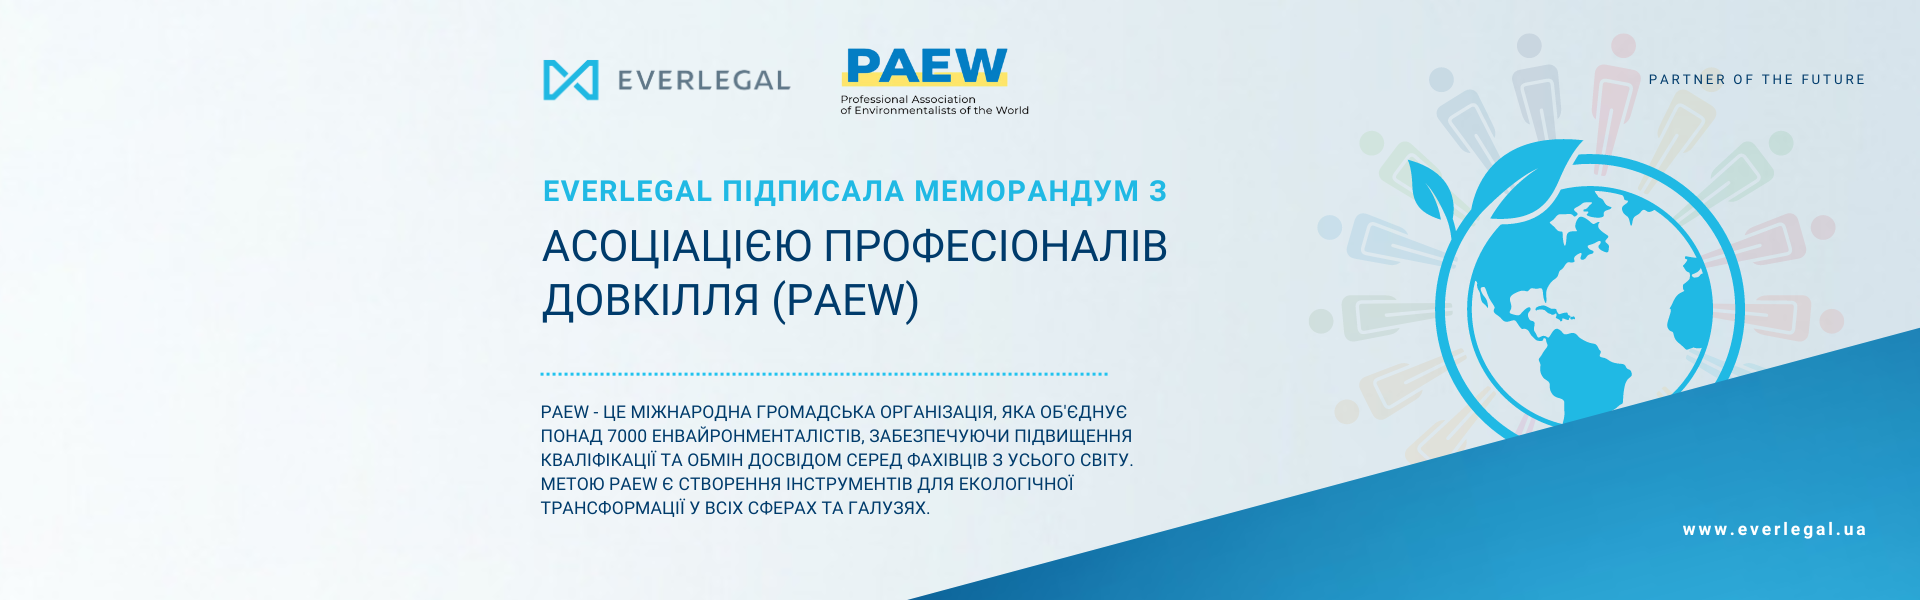 EVERLEGAL signed a Memorandum of Understanding with the Professional Association of Environmentalists of the World (PAEW)